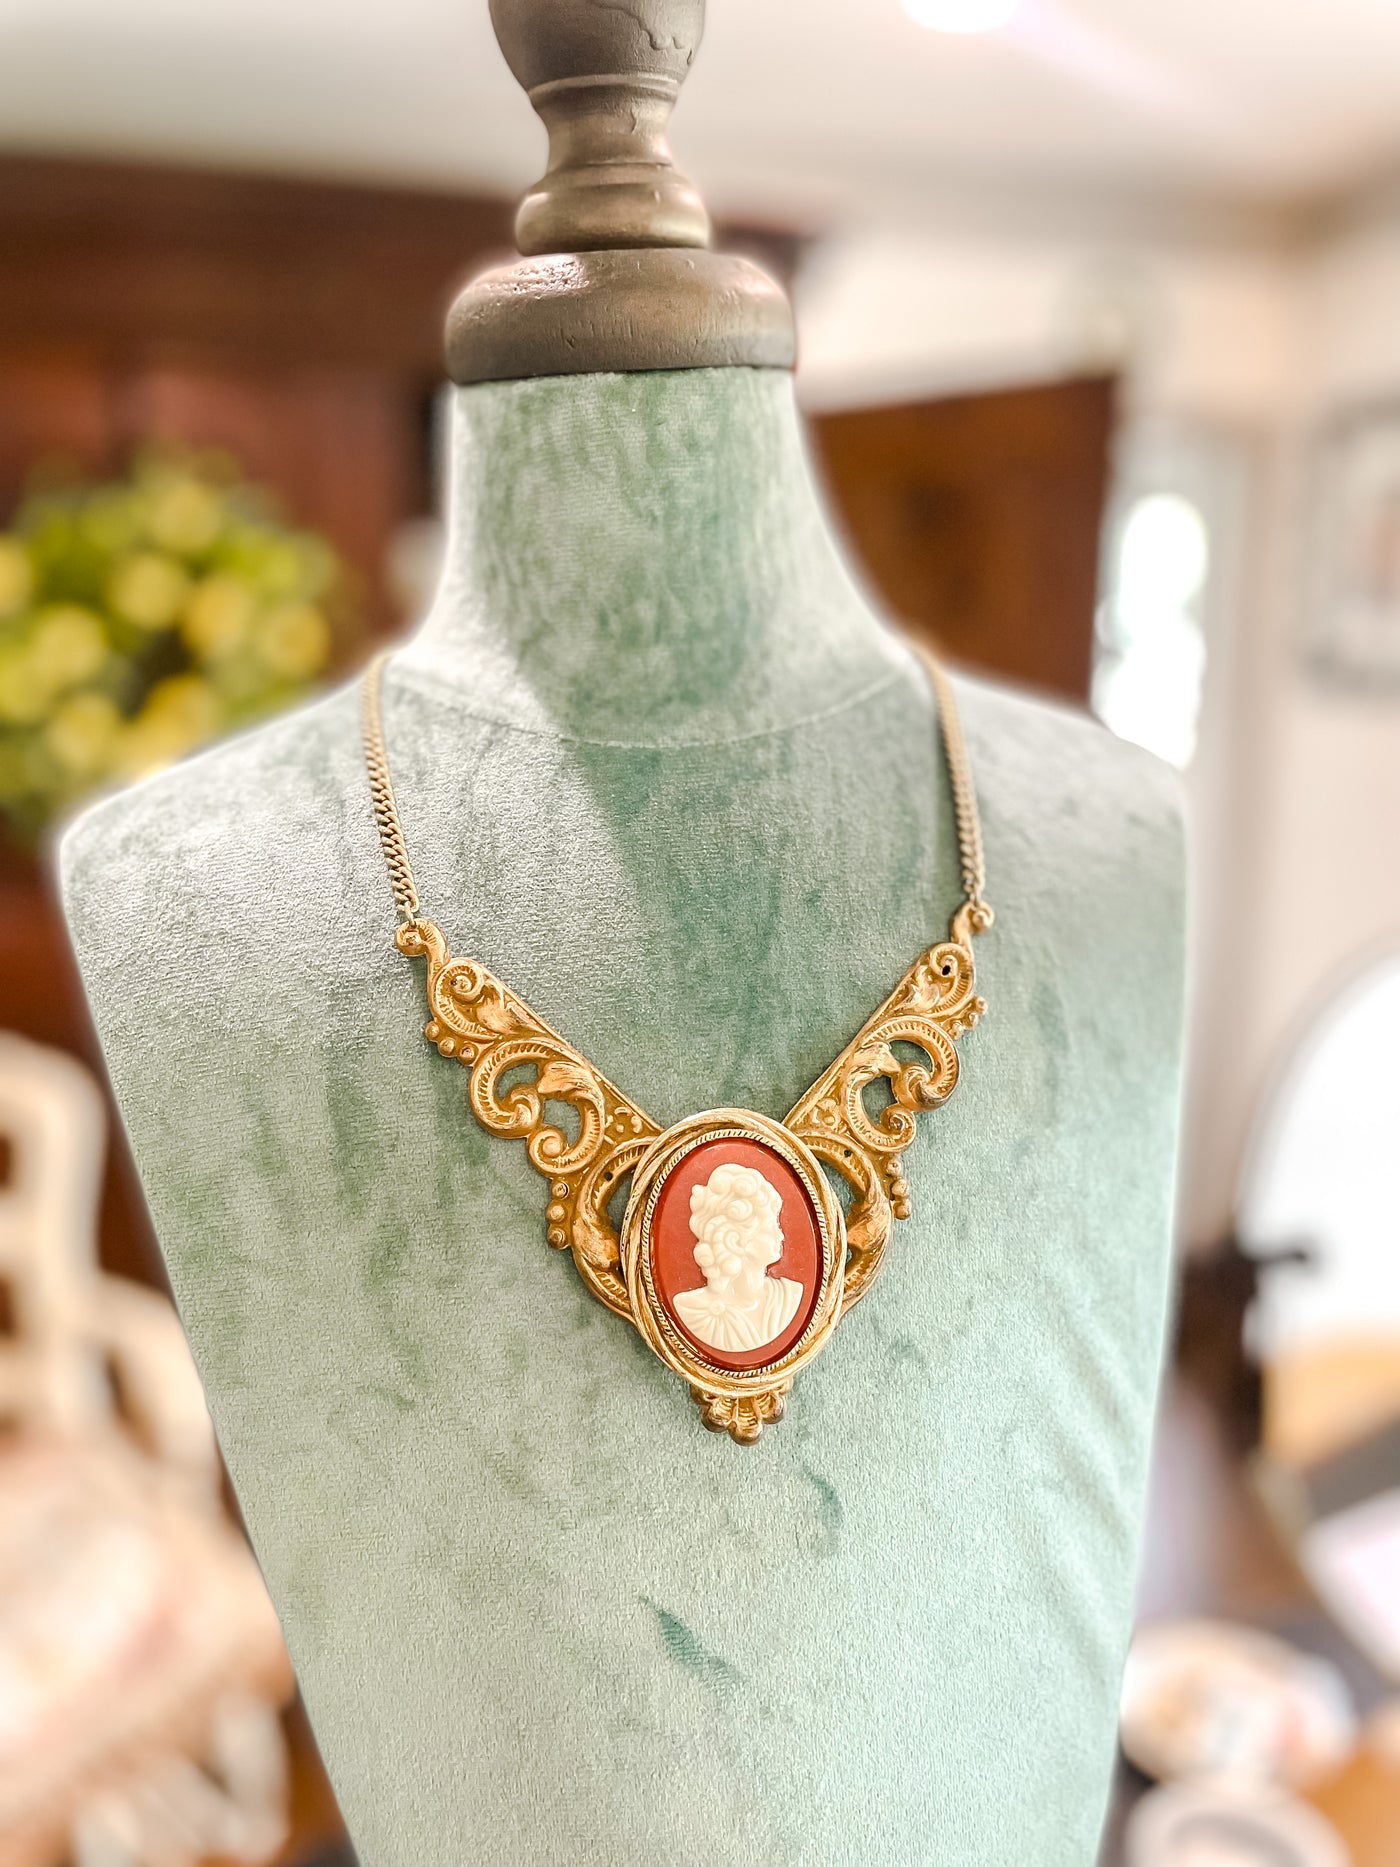 Vintage Gold Filigree and Cameo Necklace